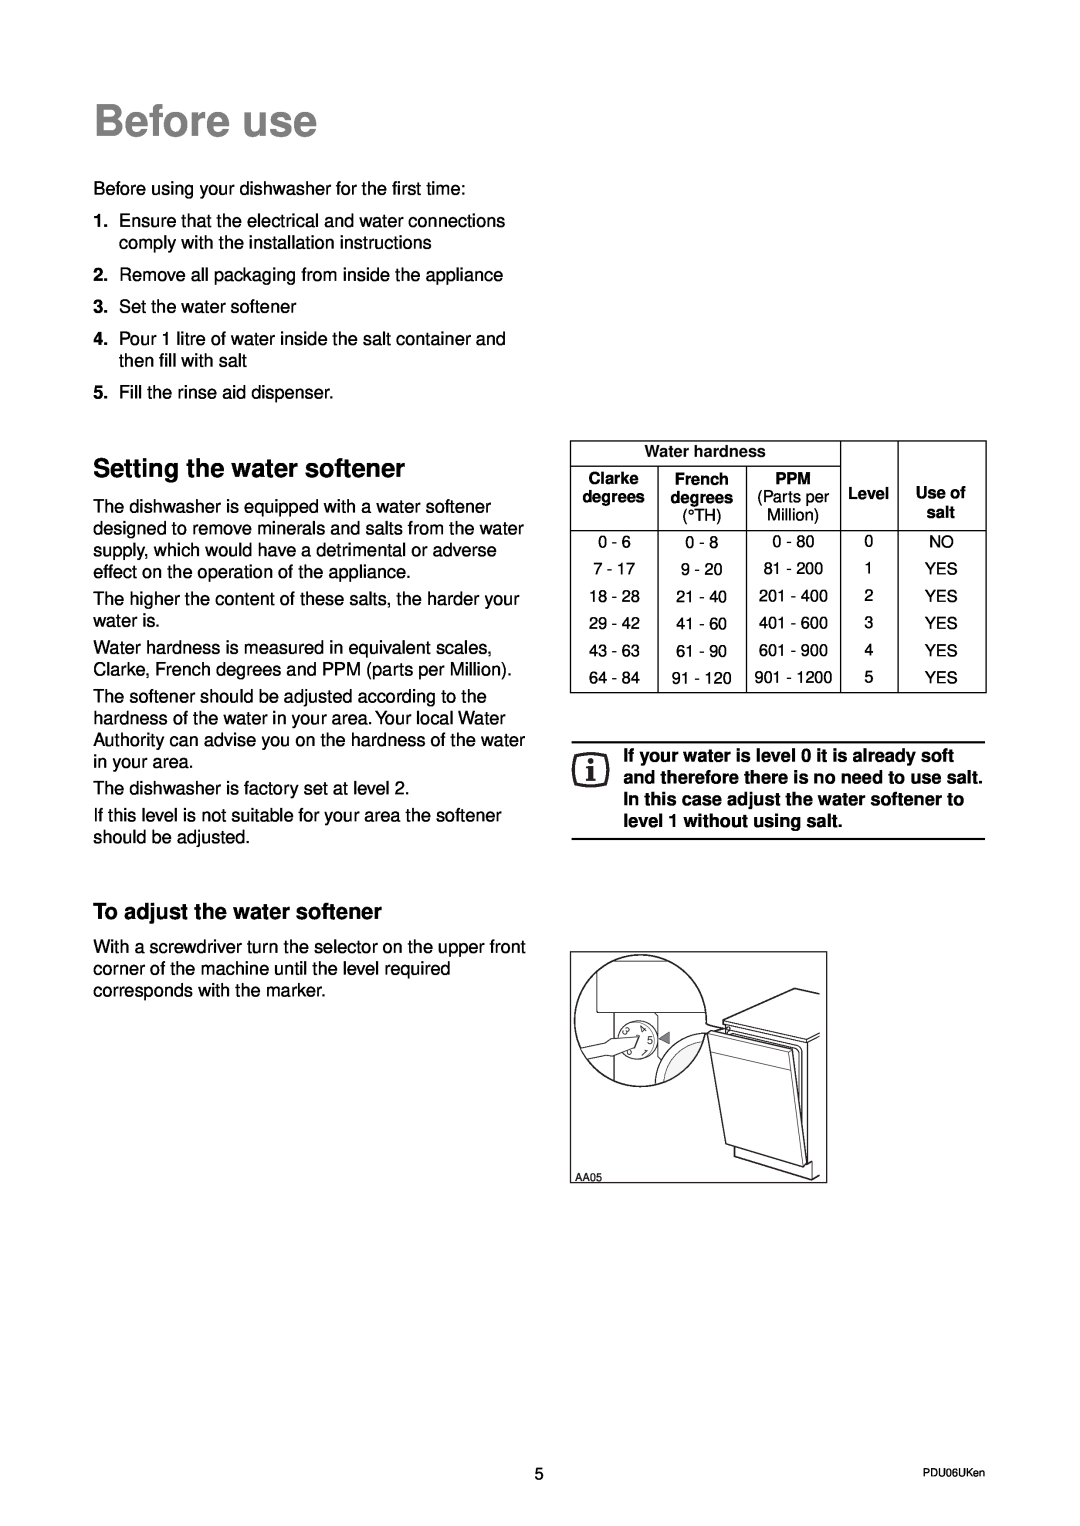 Zanussi DWS 919 manual Before use, Setting the water softener, To adjust the water softener 